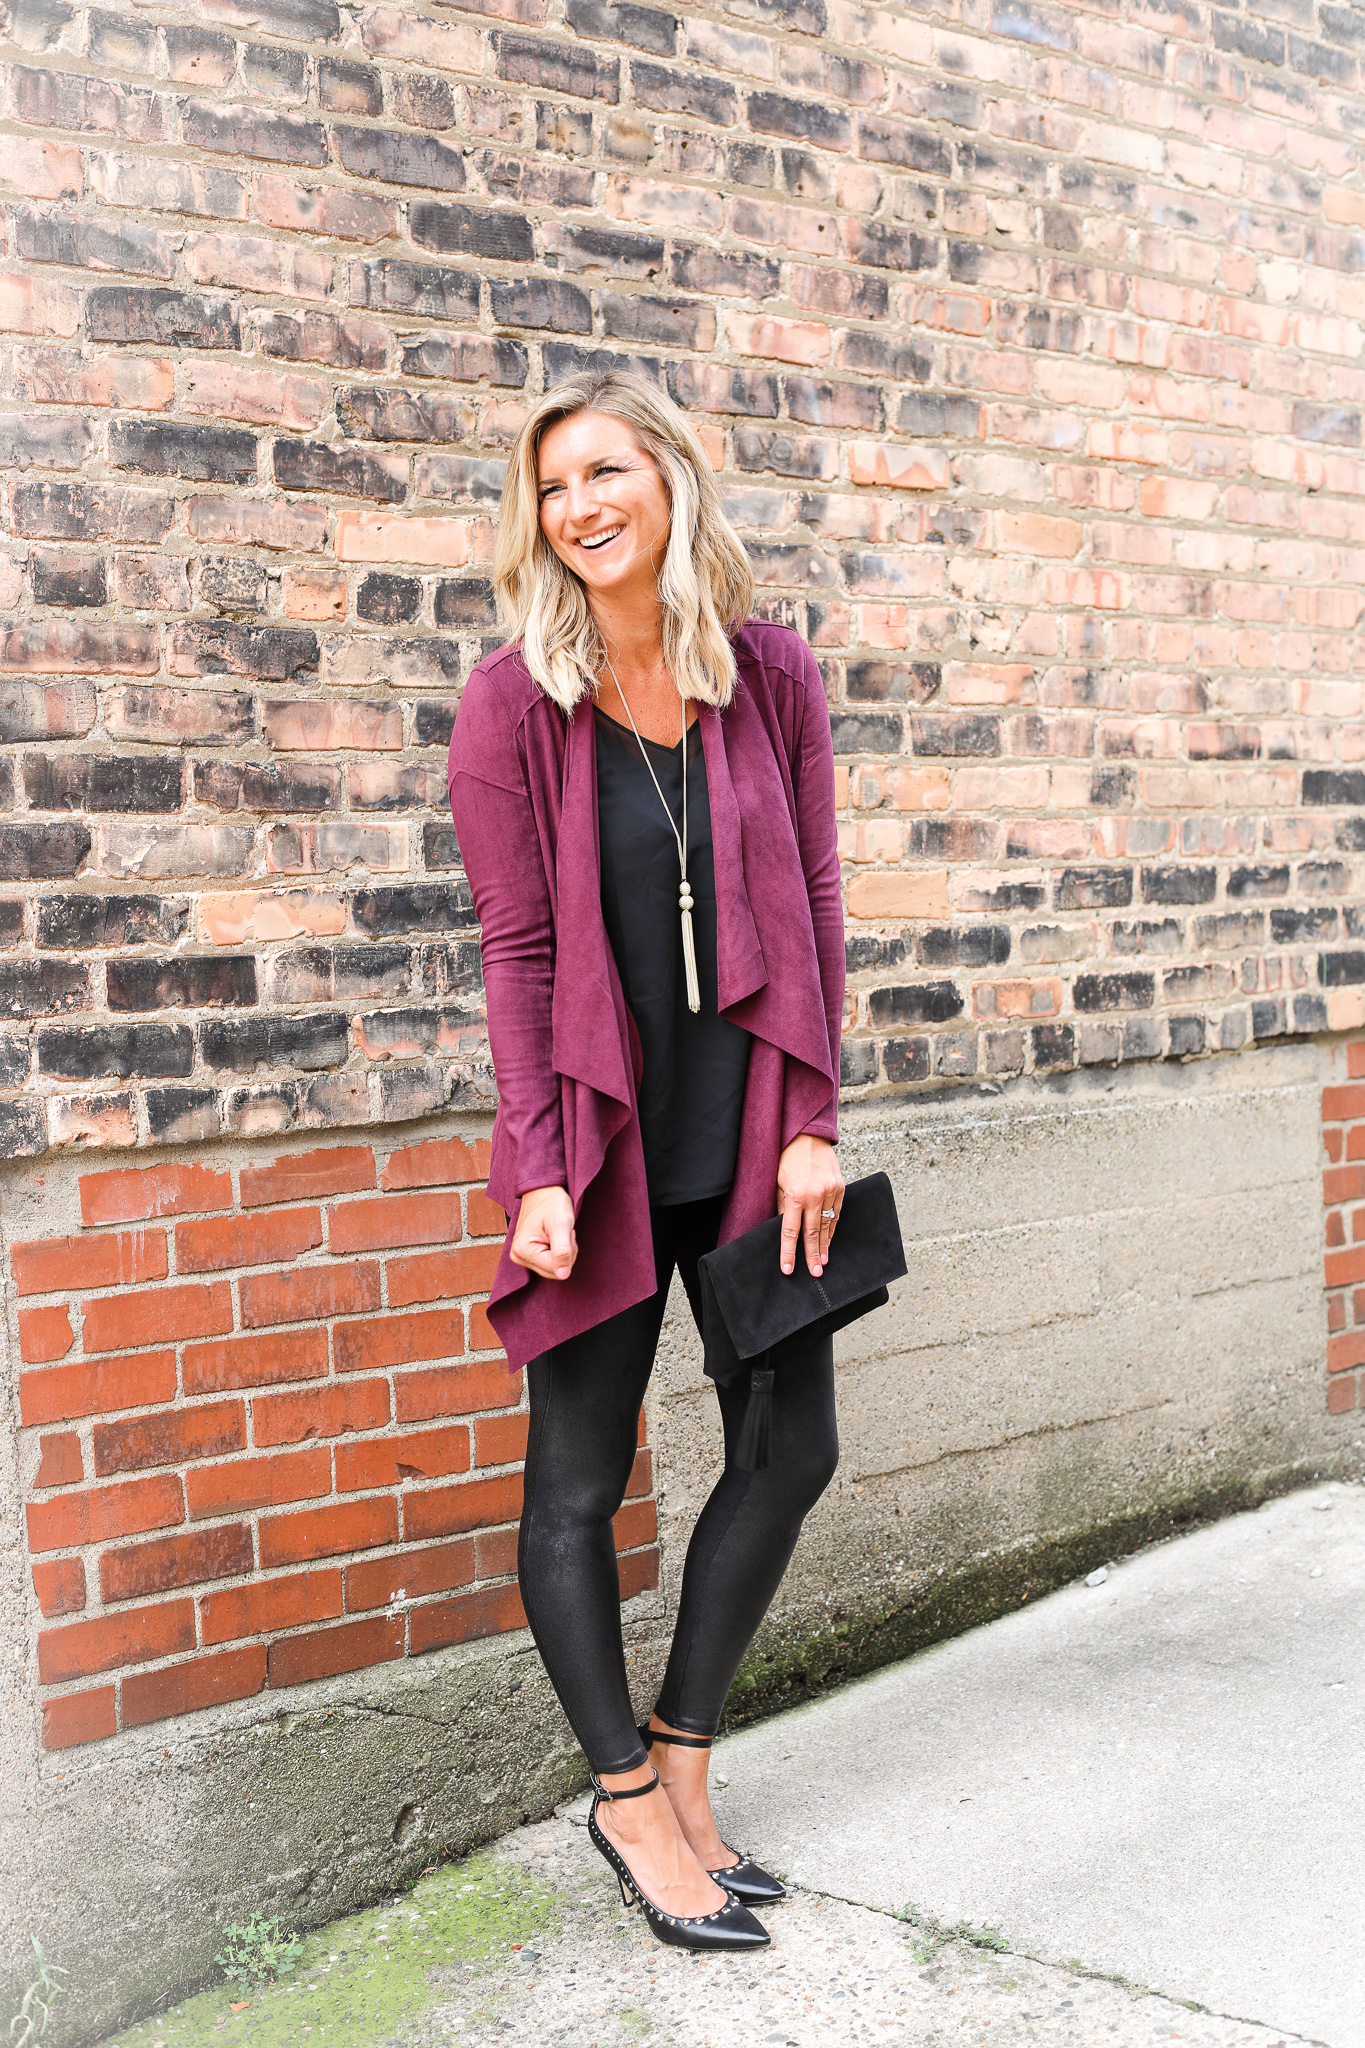 How To Style Faux Leather Leggings [3 Ways - Work, Casual, Date